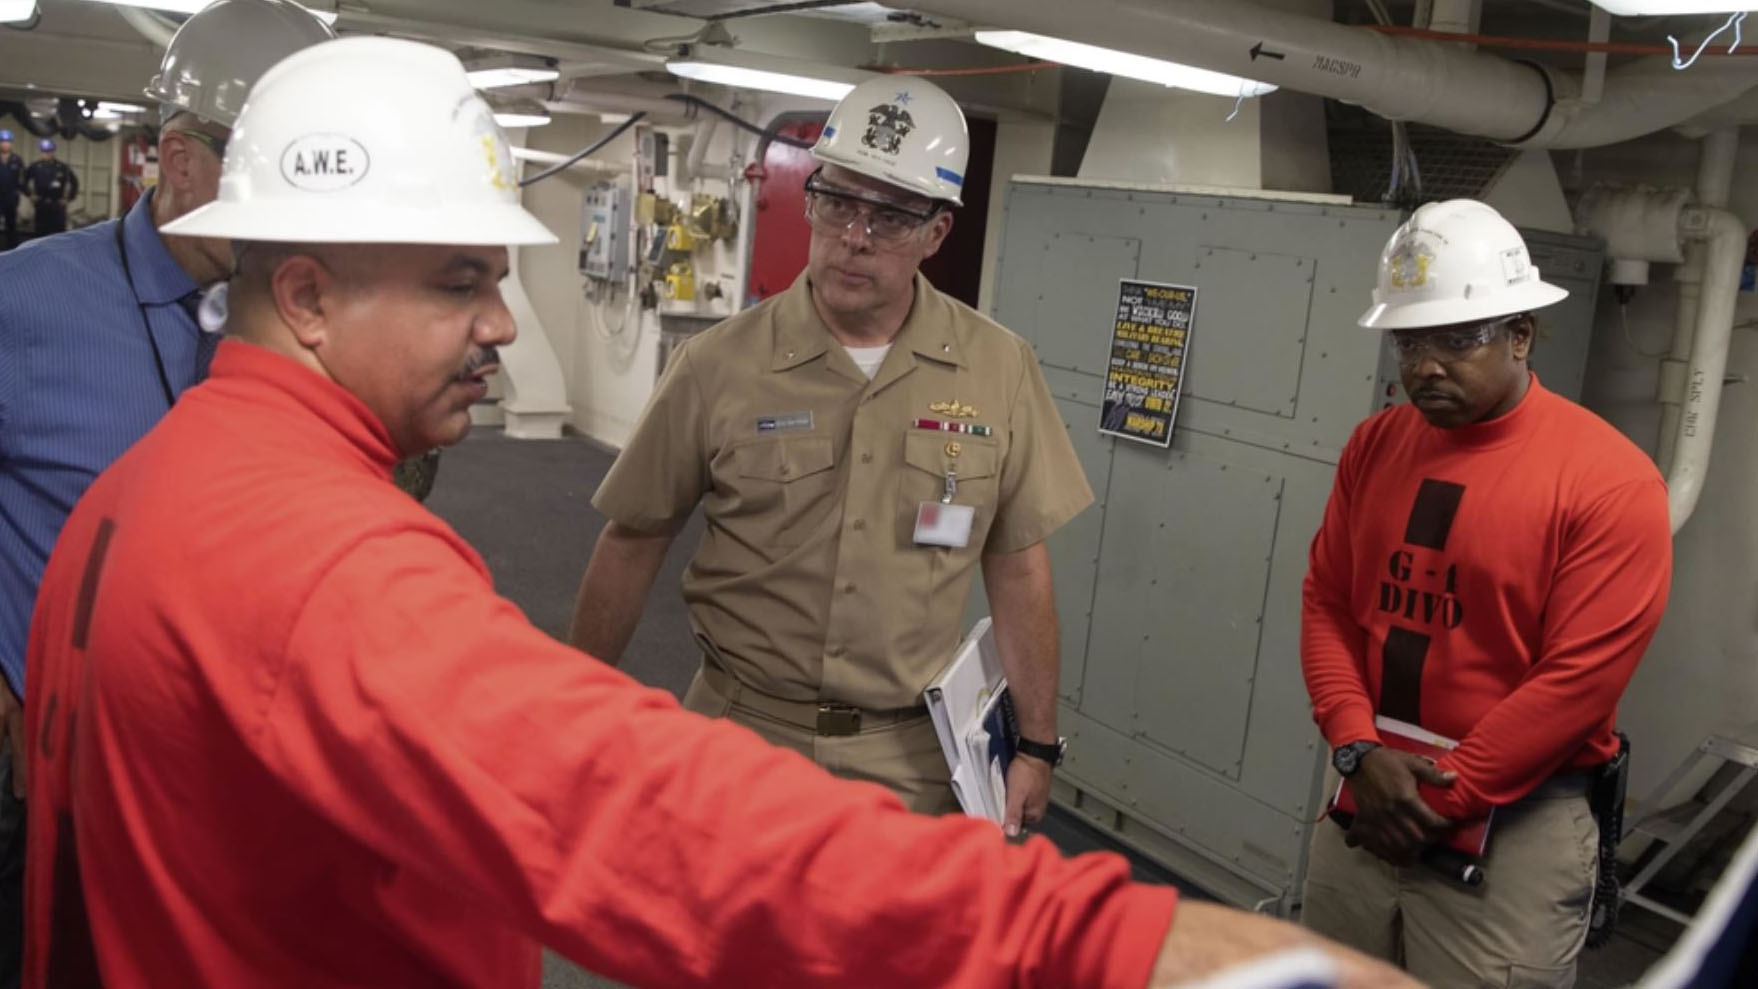 Rear Adm. Eric Ver Hage, middle, tours USS Ford during construction at Newport News in 2019. (Image: Department of Defense)